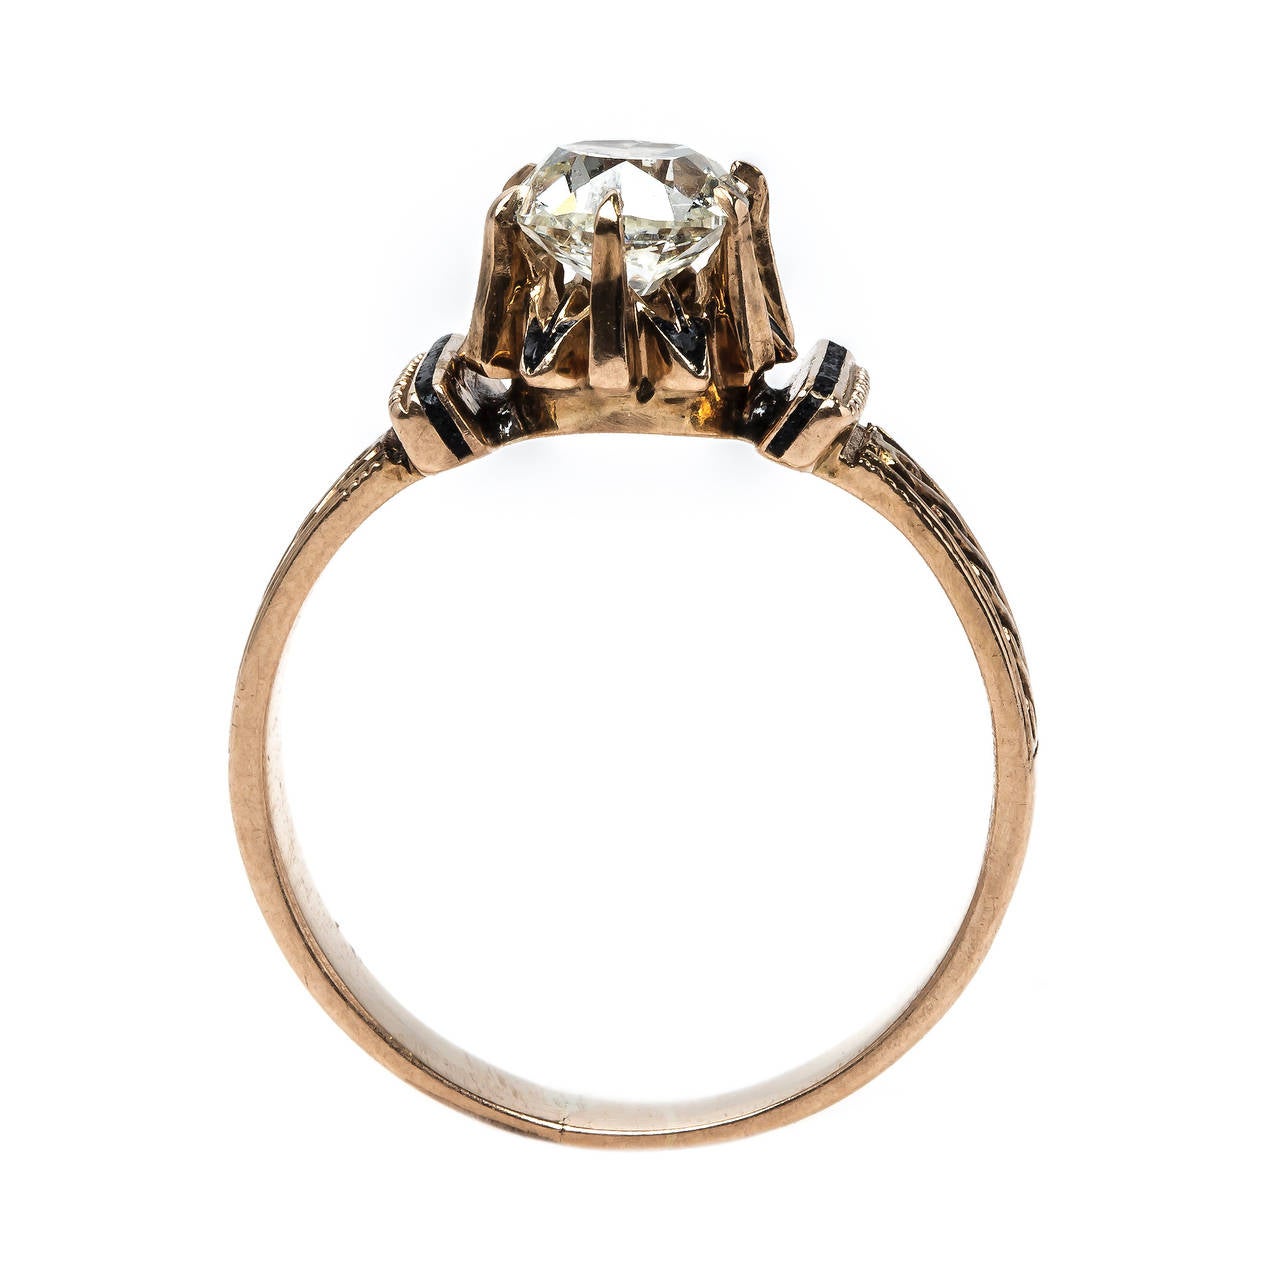 Women's Early Victorian Diamond Solitaire Engagement Ring with Starburst Design